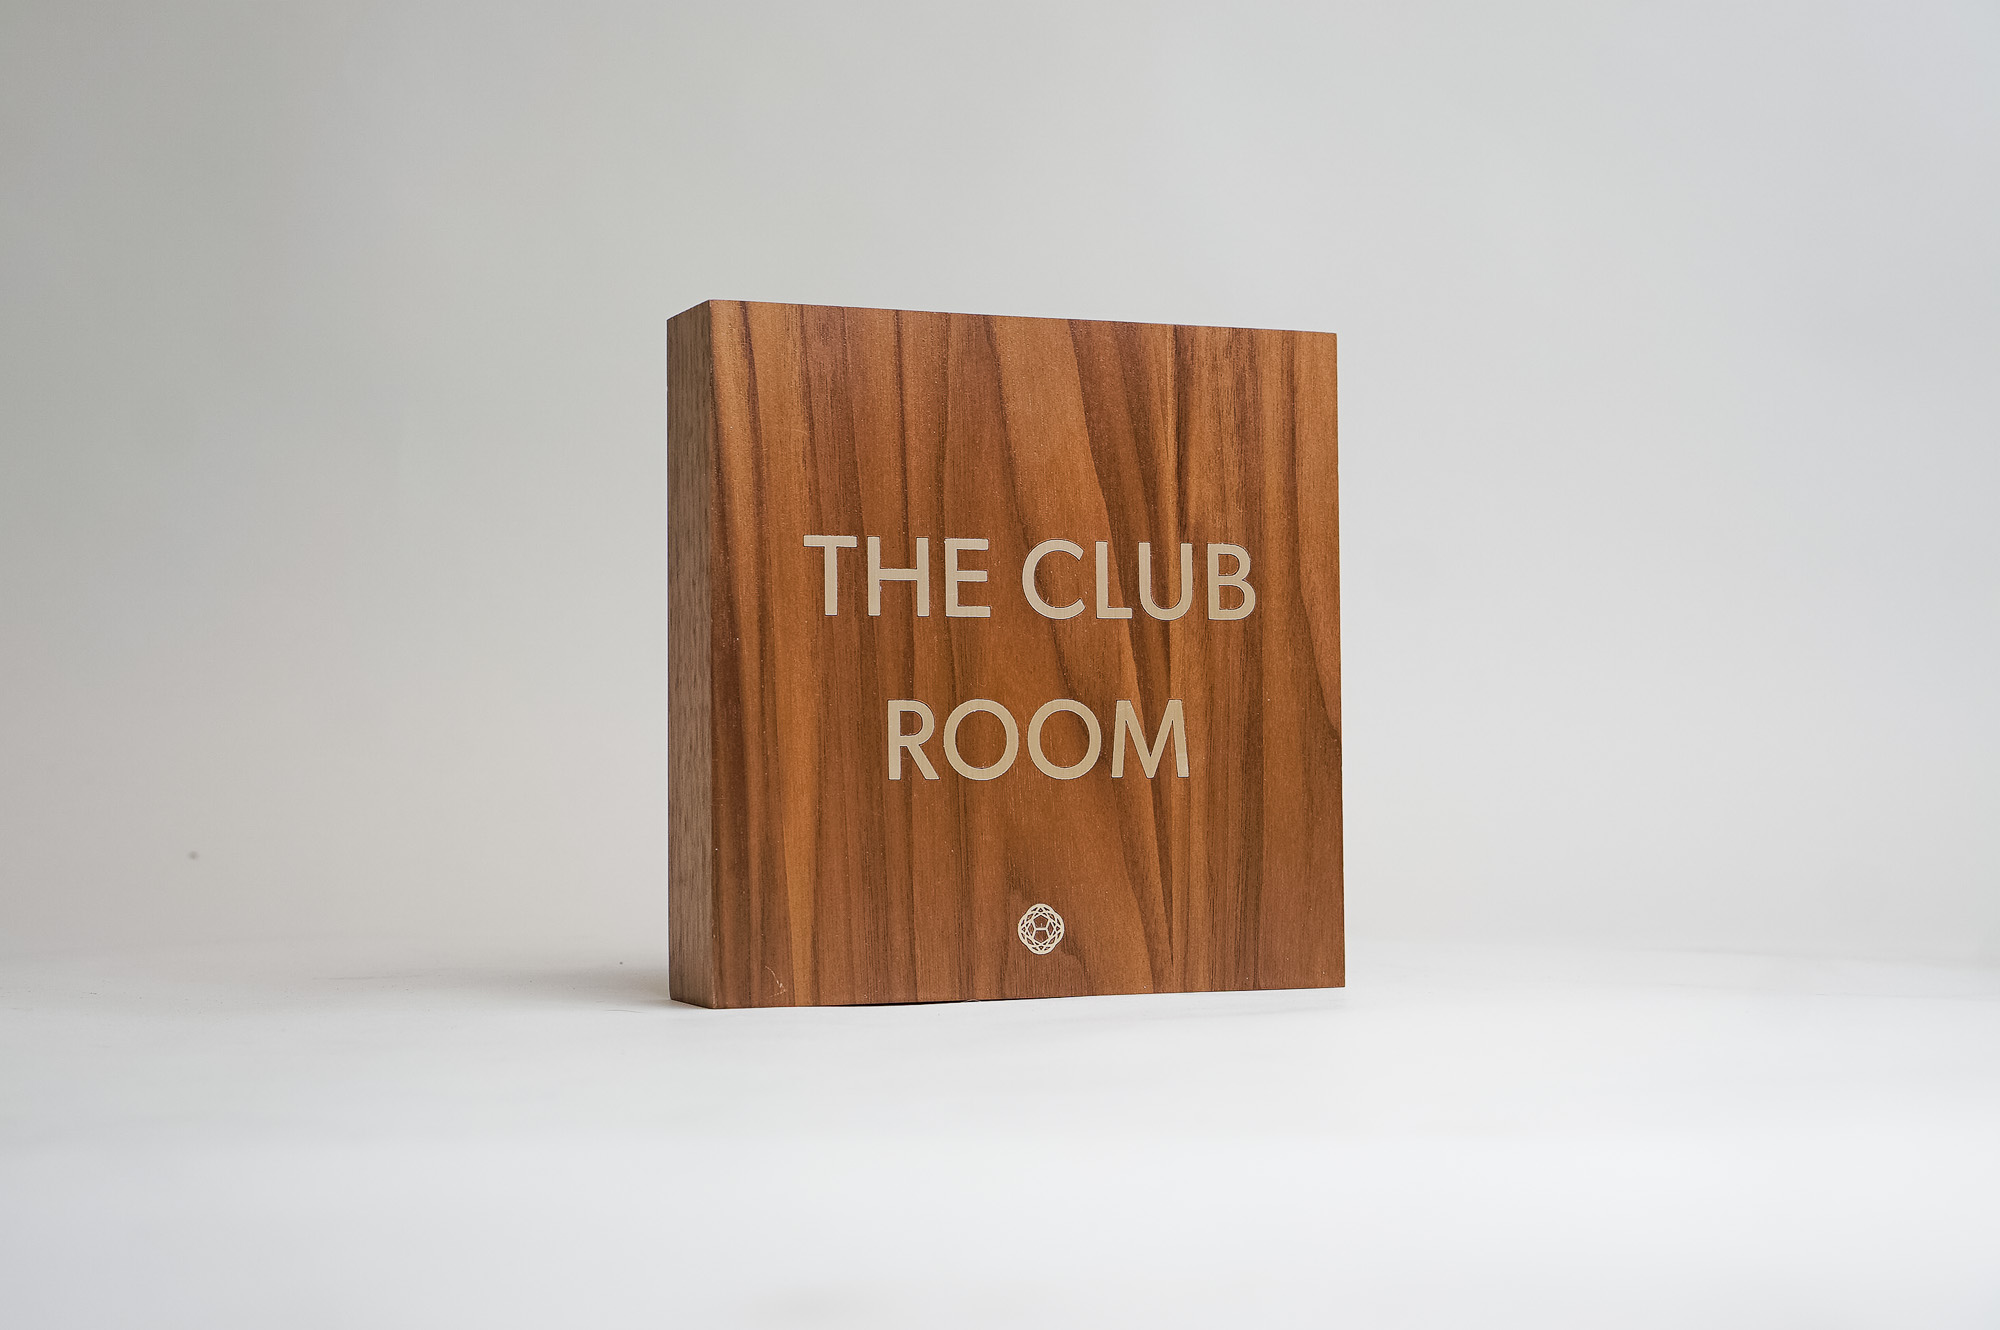 Vintage walnut and inlaid-brass style sign for Nexus Club, a private social and business club in New York.